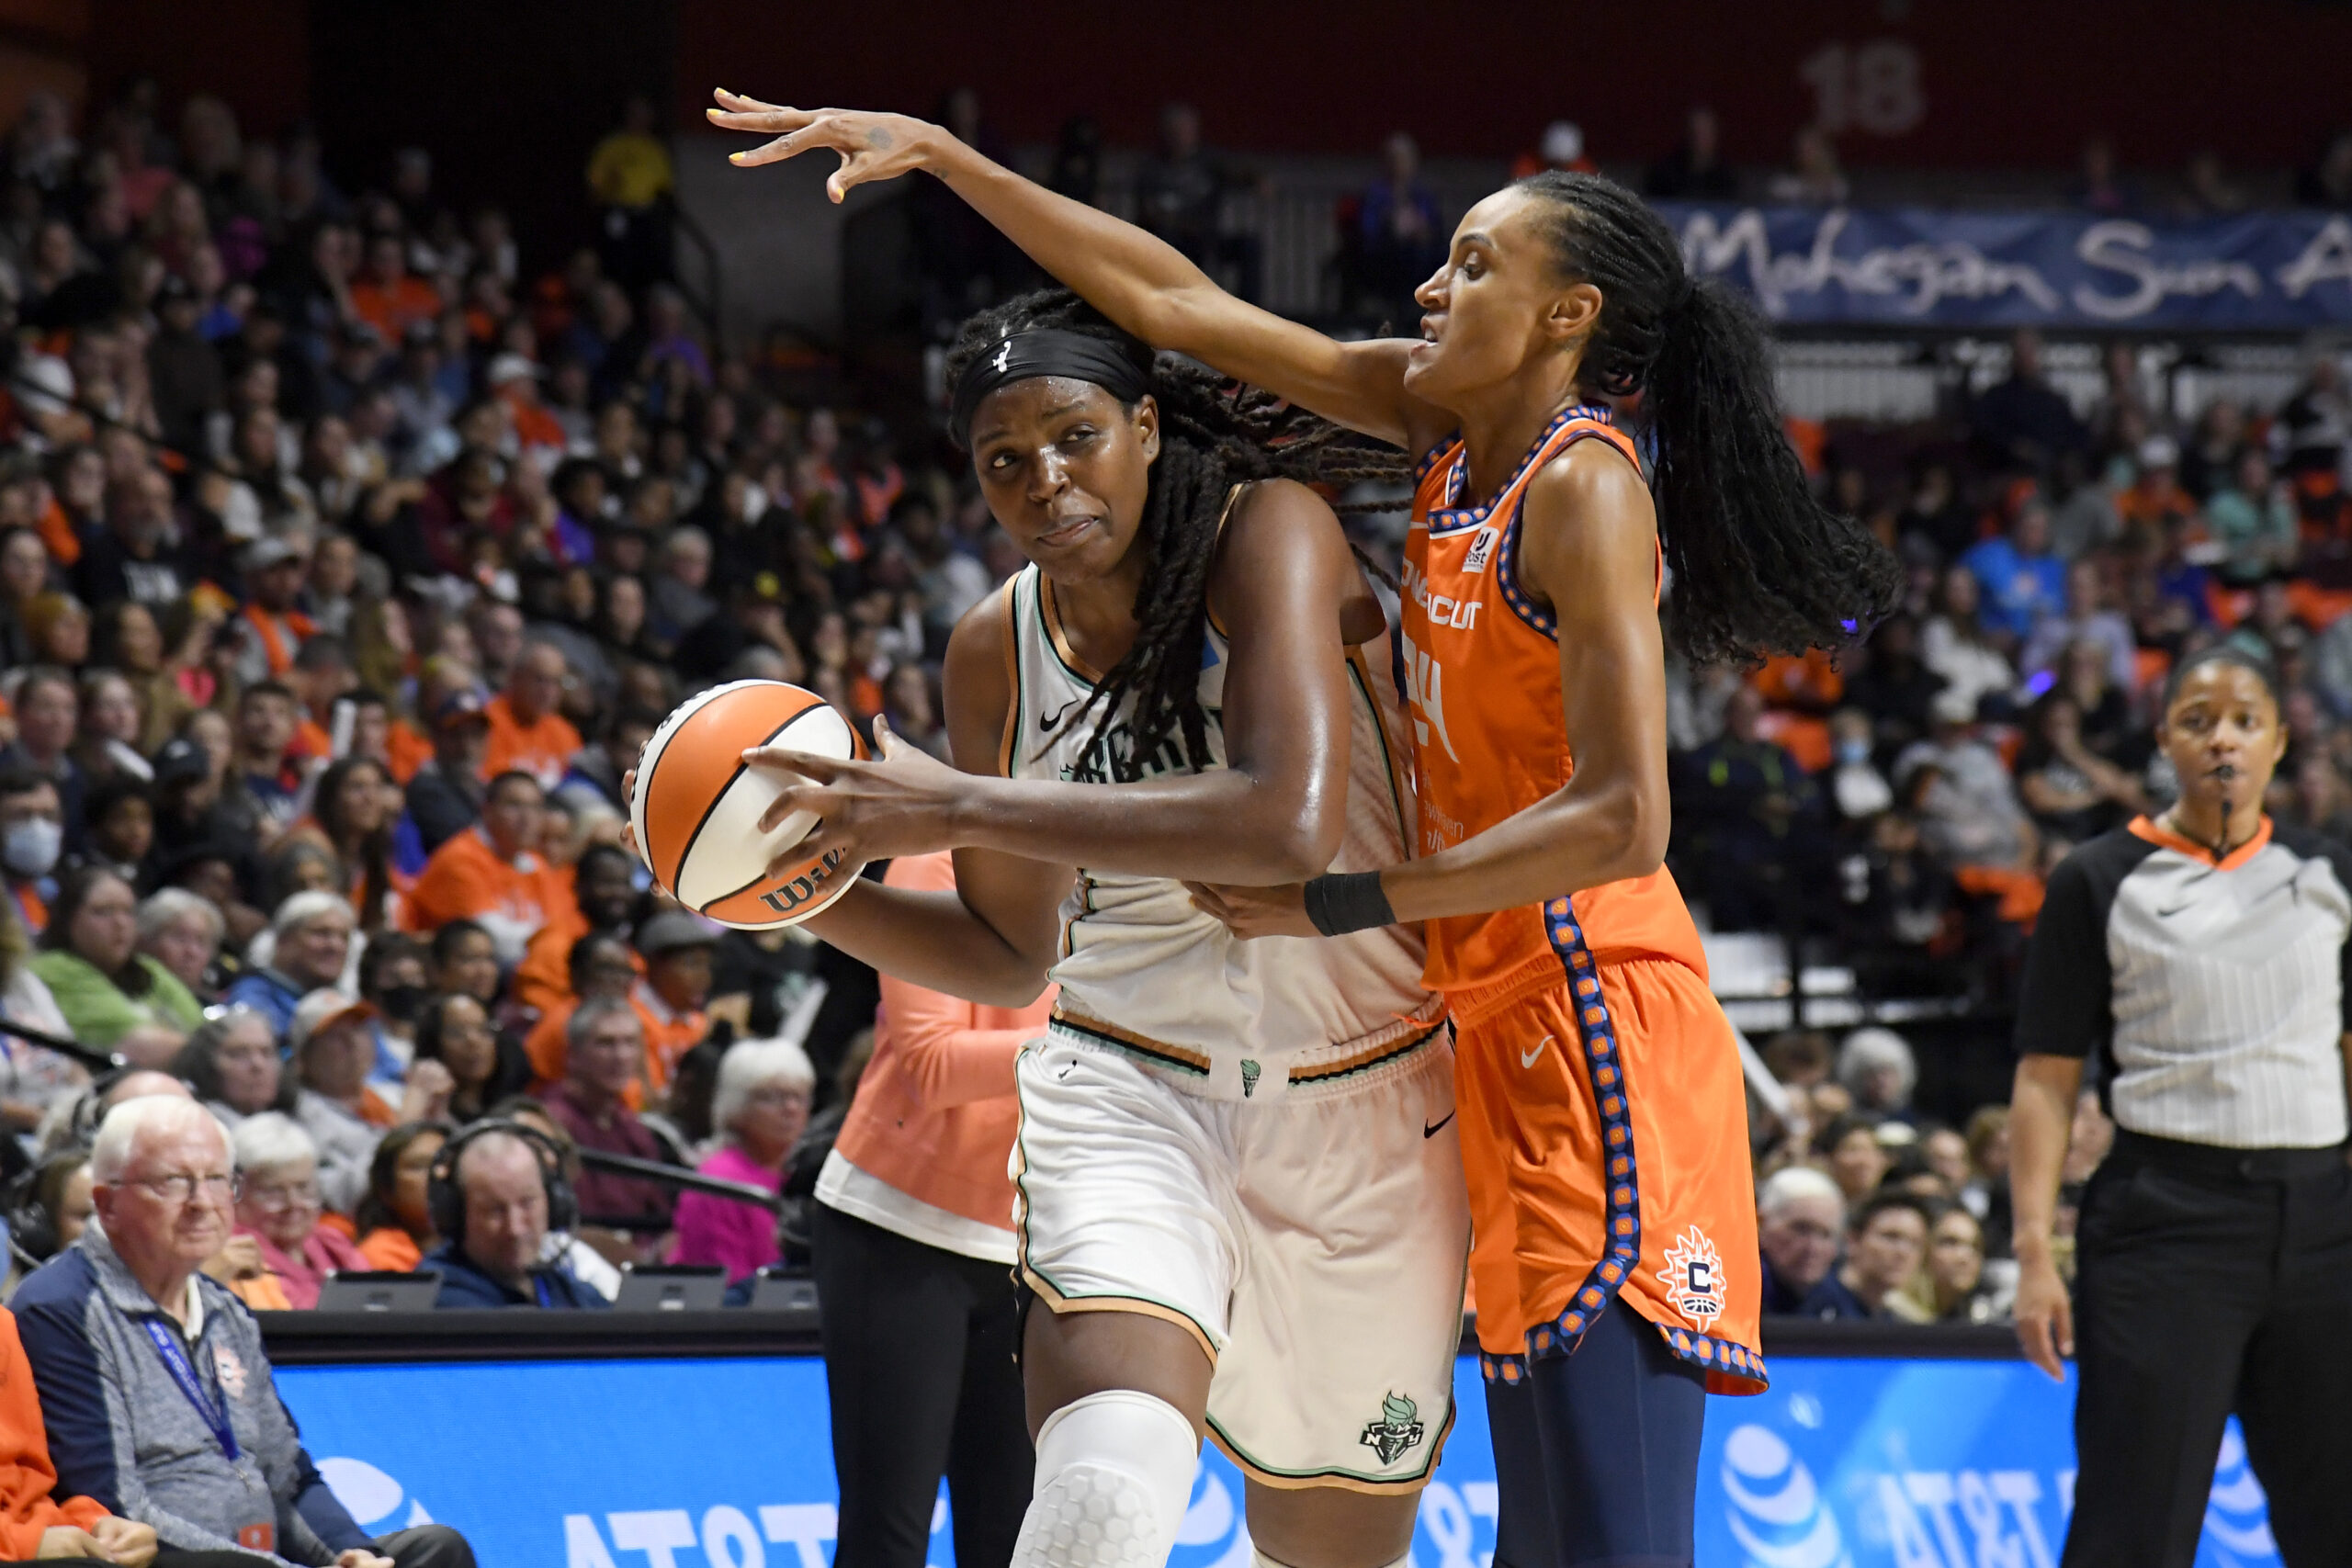 Your 2021 WNBA sister battles begin now - The Next